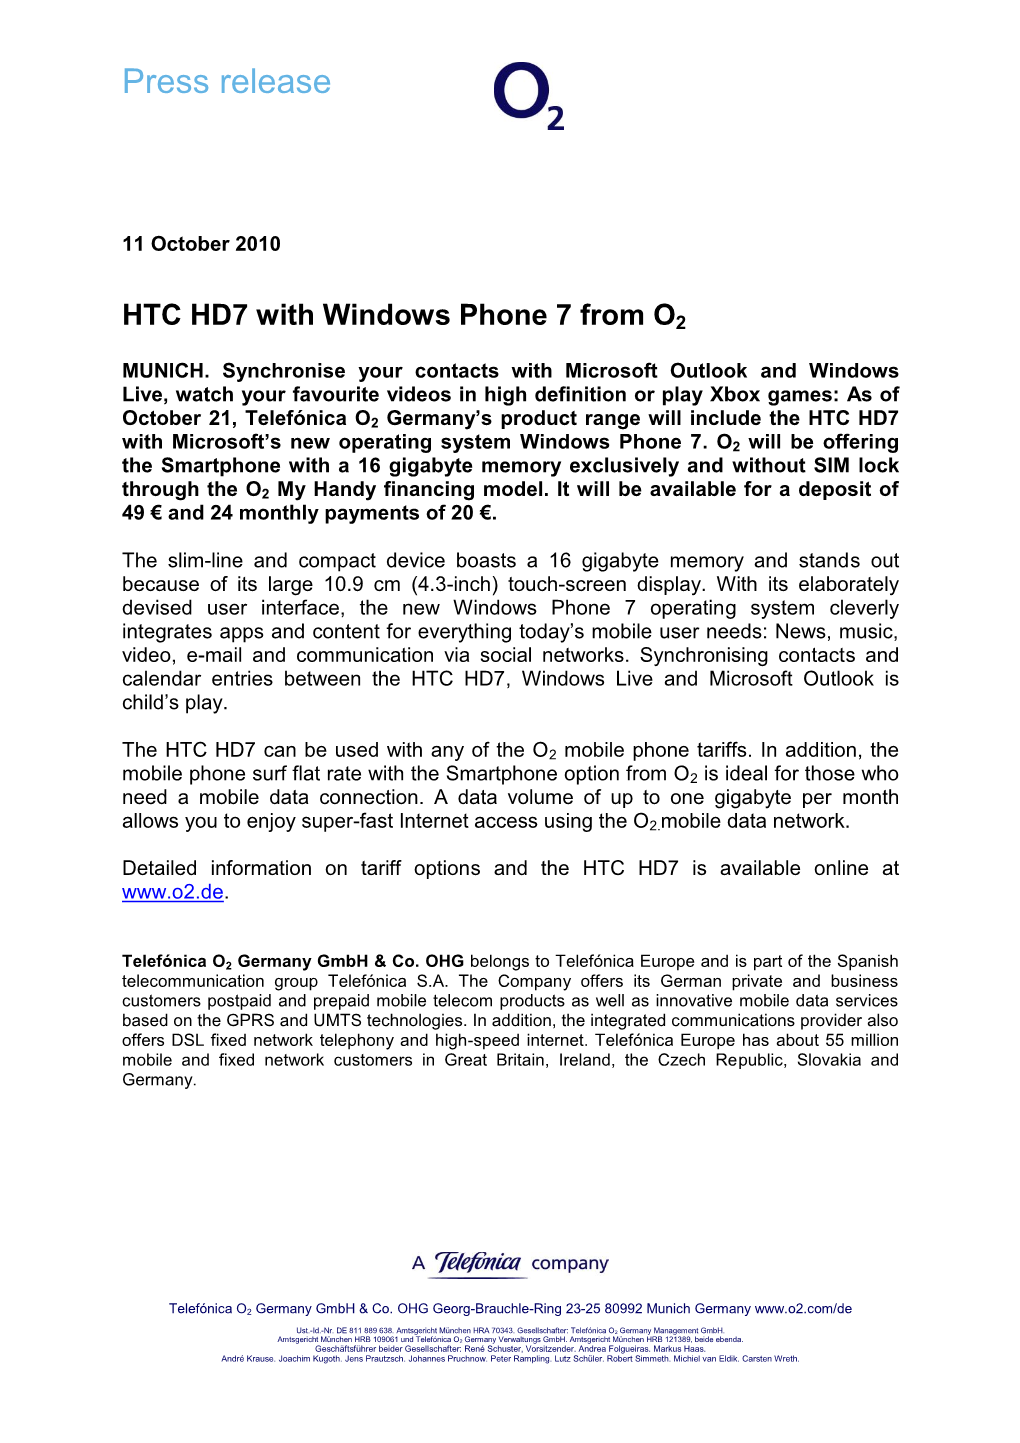 HTC HD7 with Windows Phone 7 from O2